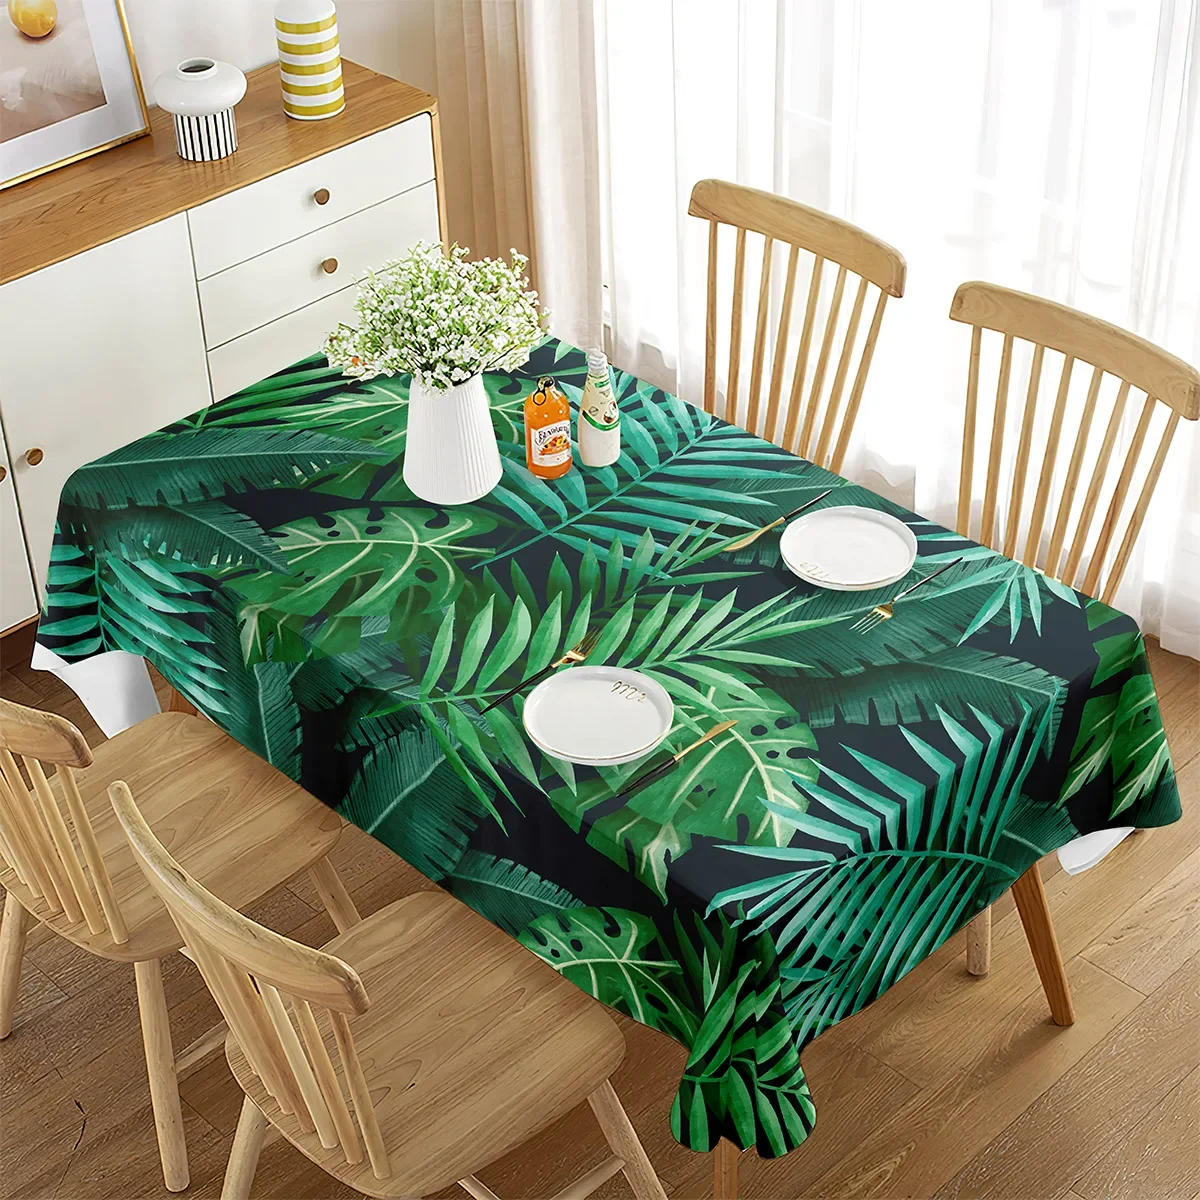 

Tropical Palm Leaf Rectangle Tablecloth Holiday Party Decoration Waterproof Fabric Tablecloth Kitchen Dining Table Wedding Decor